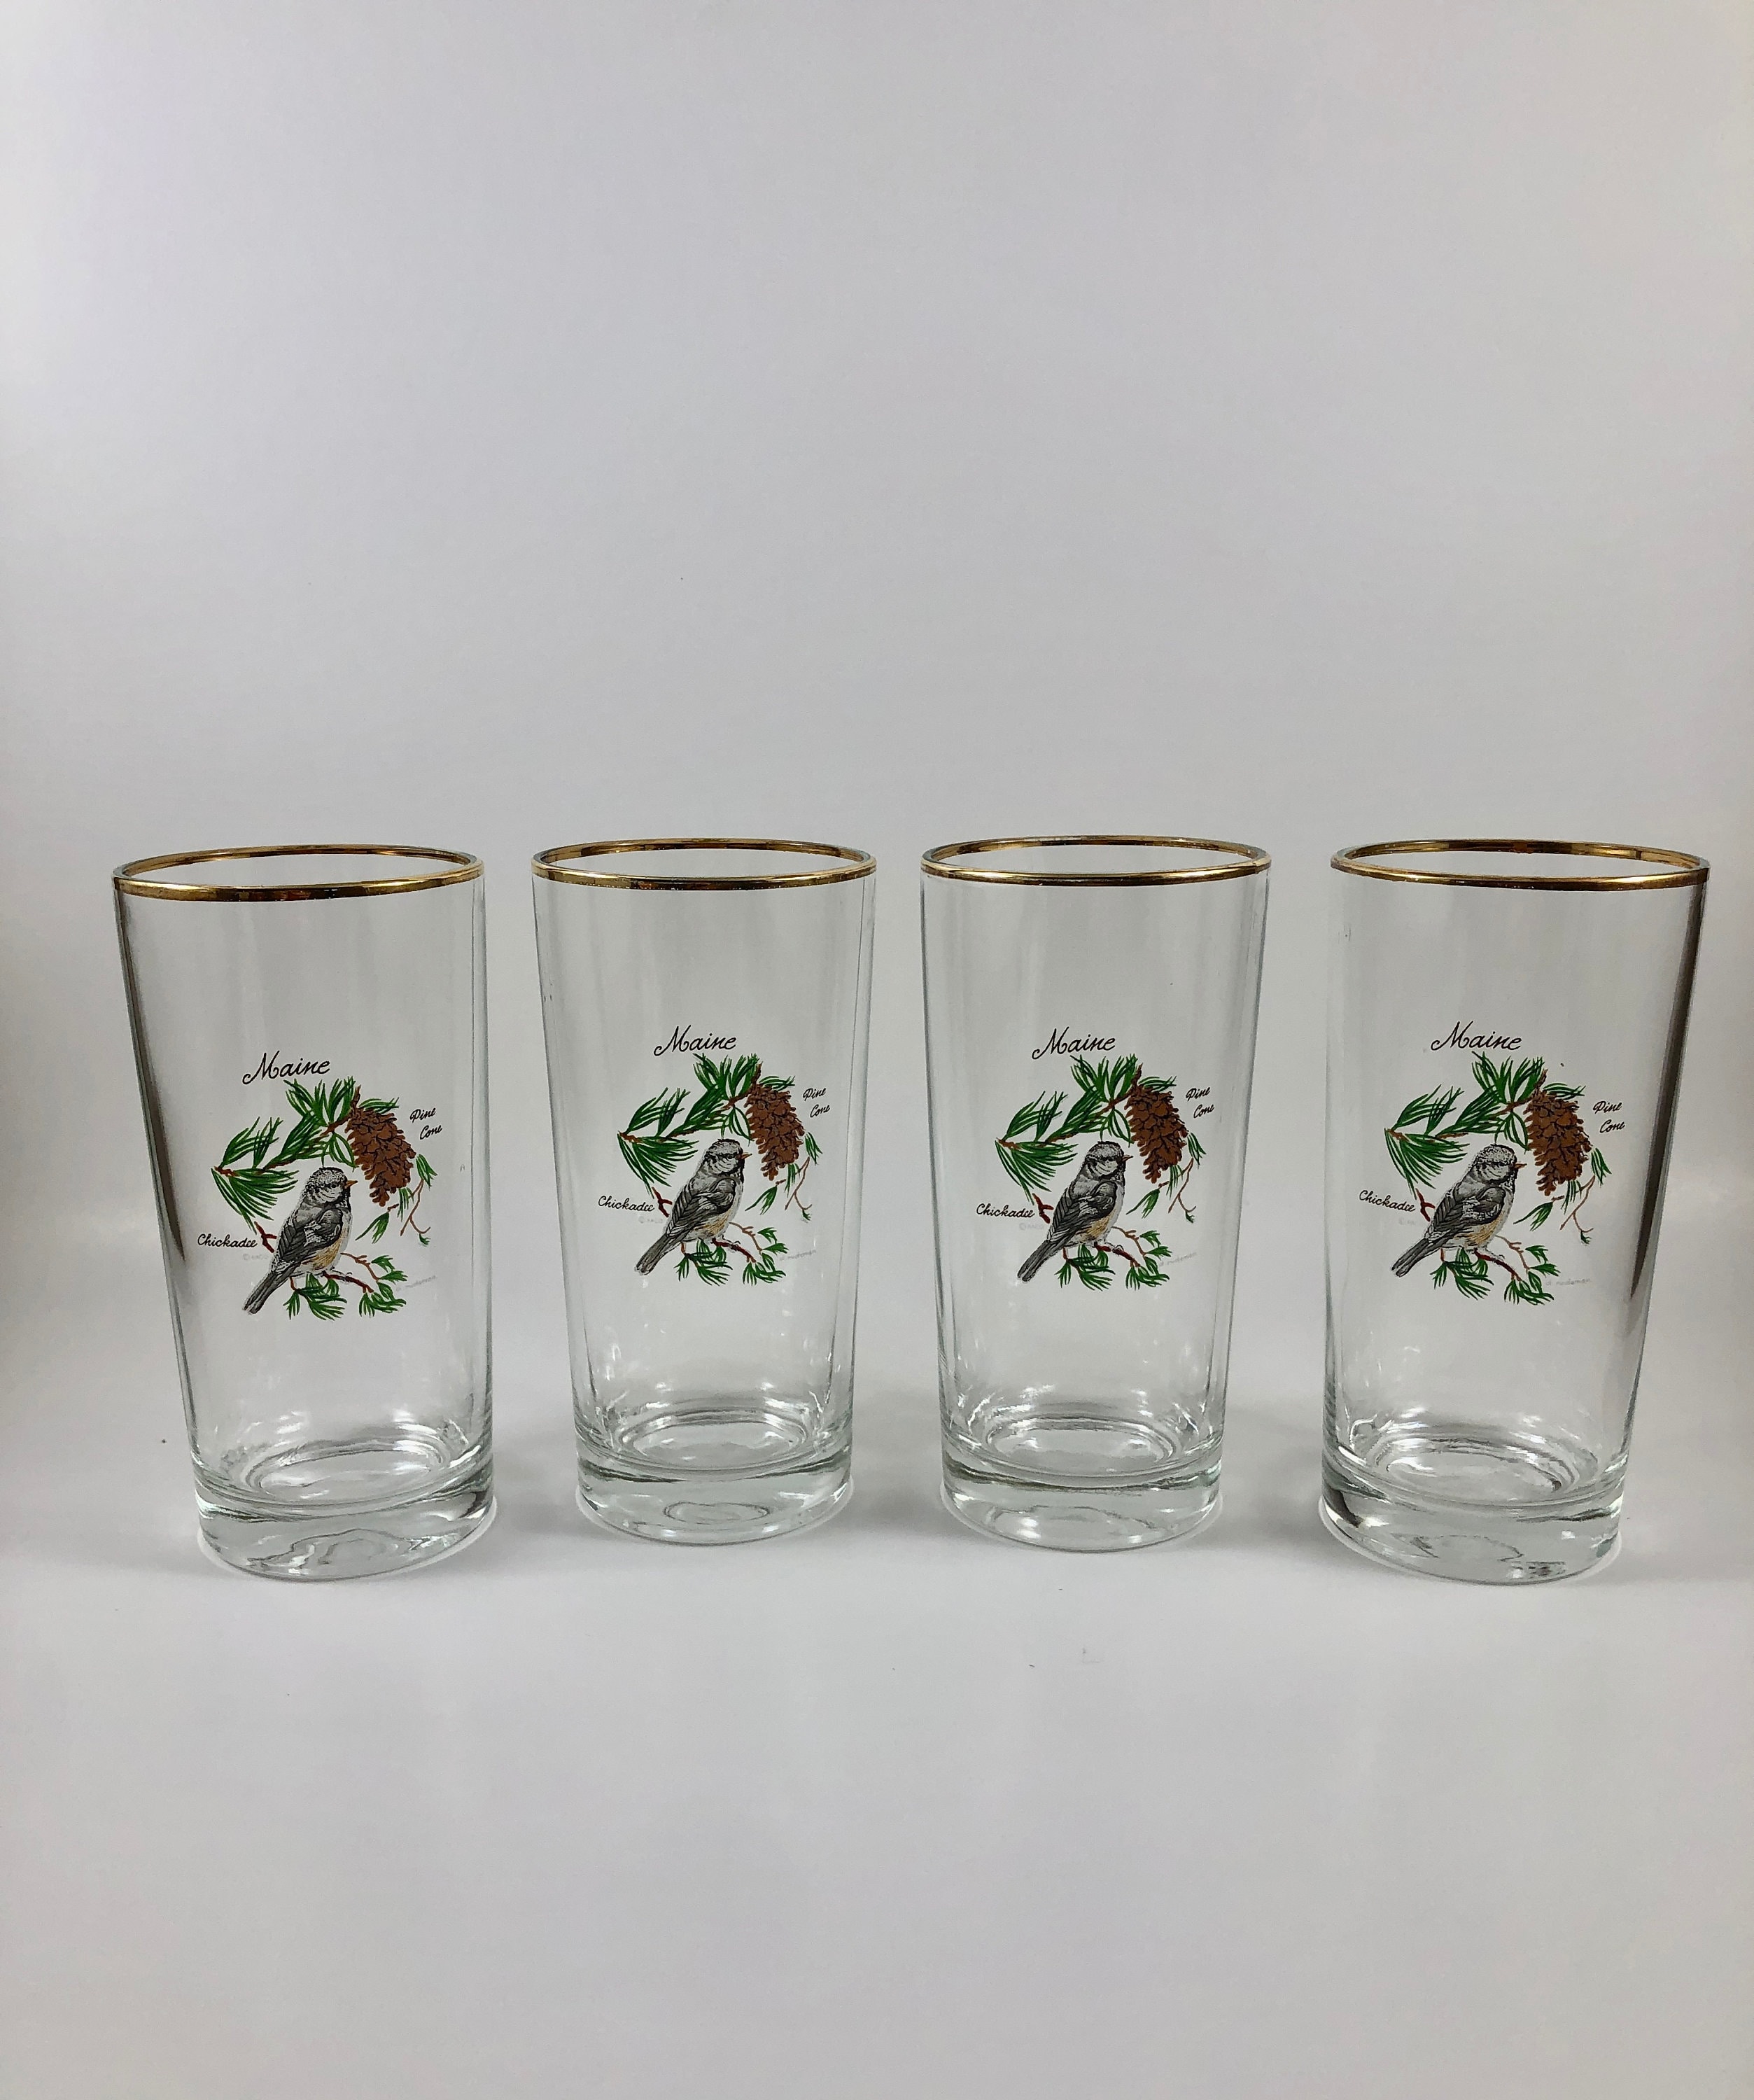 6 Vintage Libbey Christmas Etched Pinecone Gold Rim Glasses